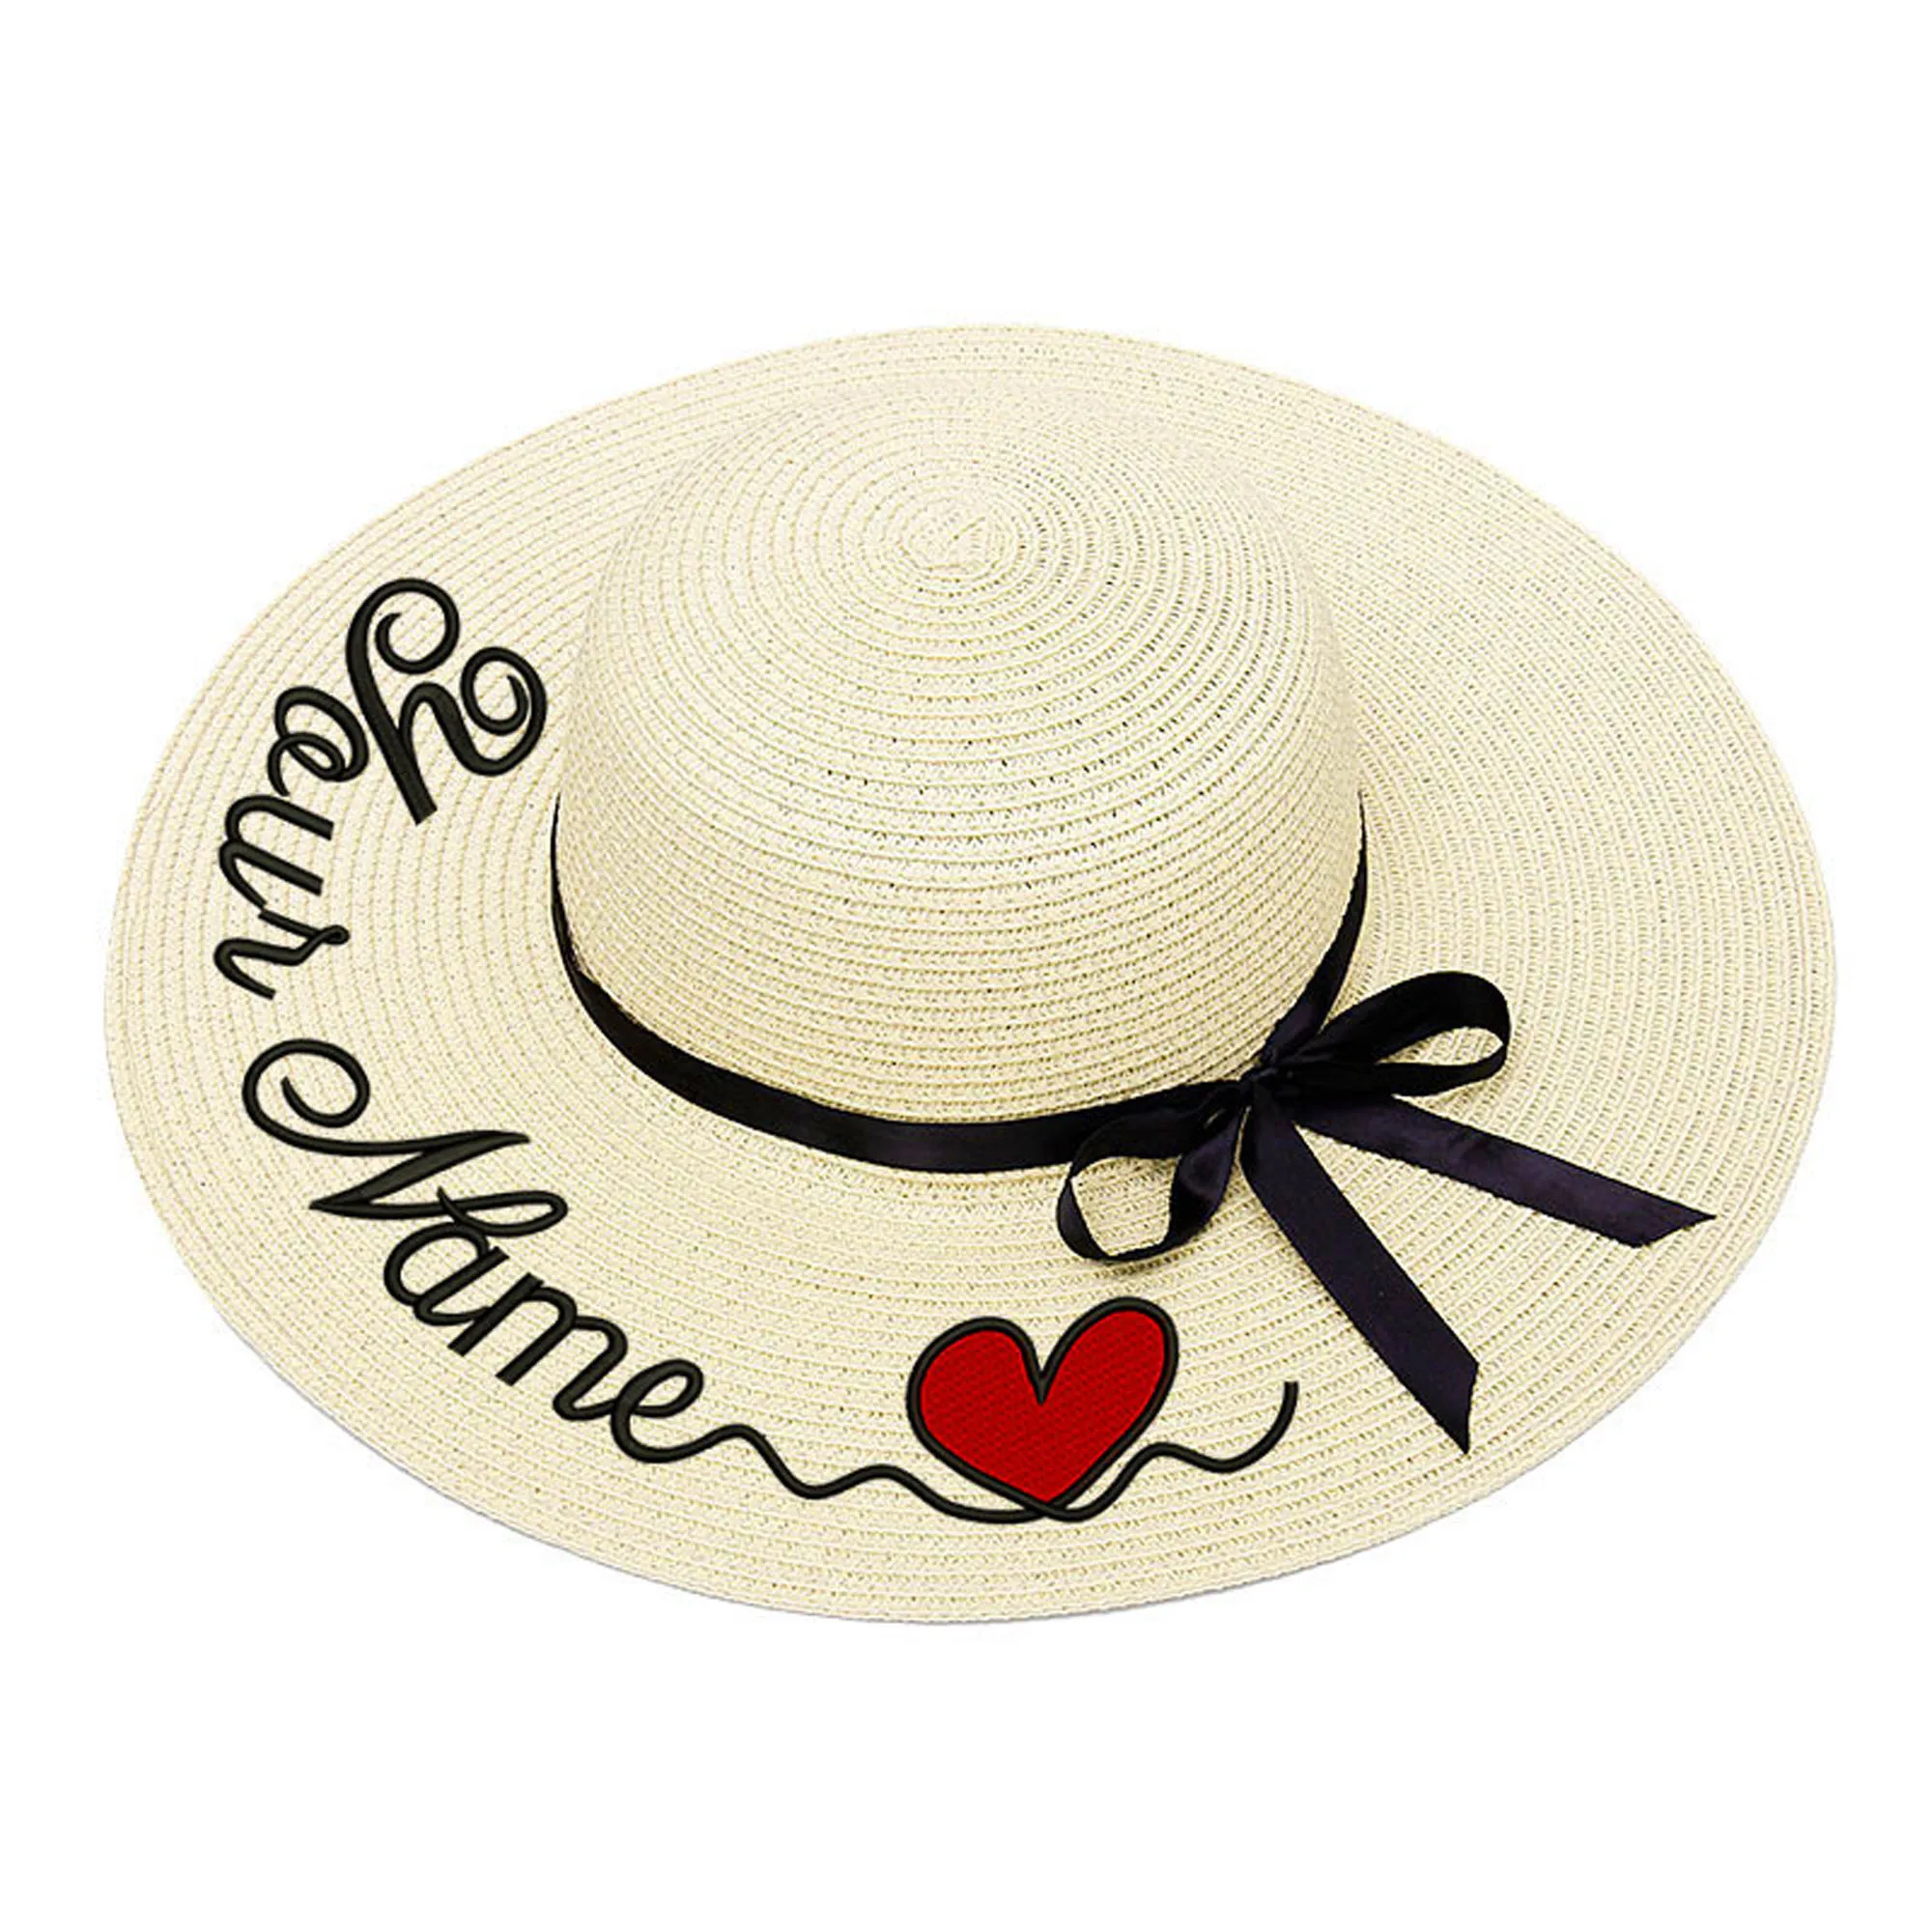 

Embroidery Personalized Custom Your Name LOGO Text Women Sun Hat Large Brim Straw Hat Honeymoon wedding Beach hat Dropshipping